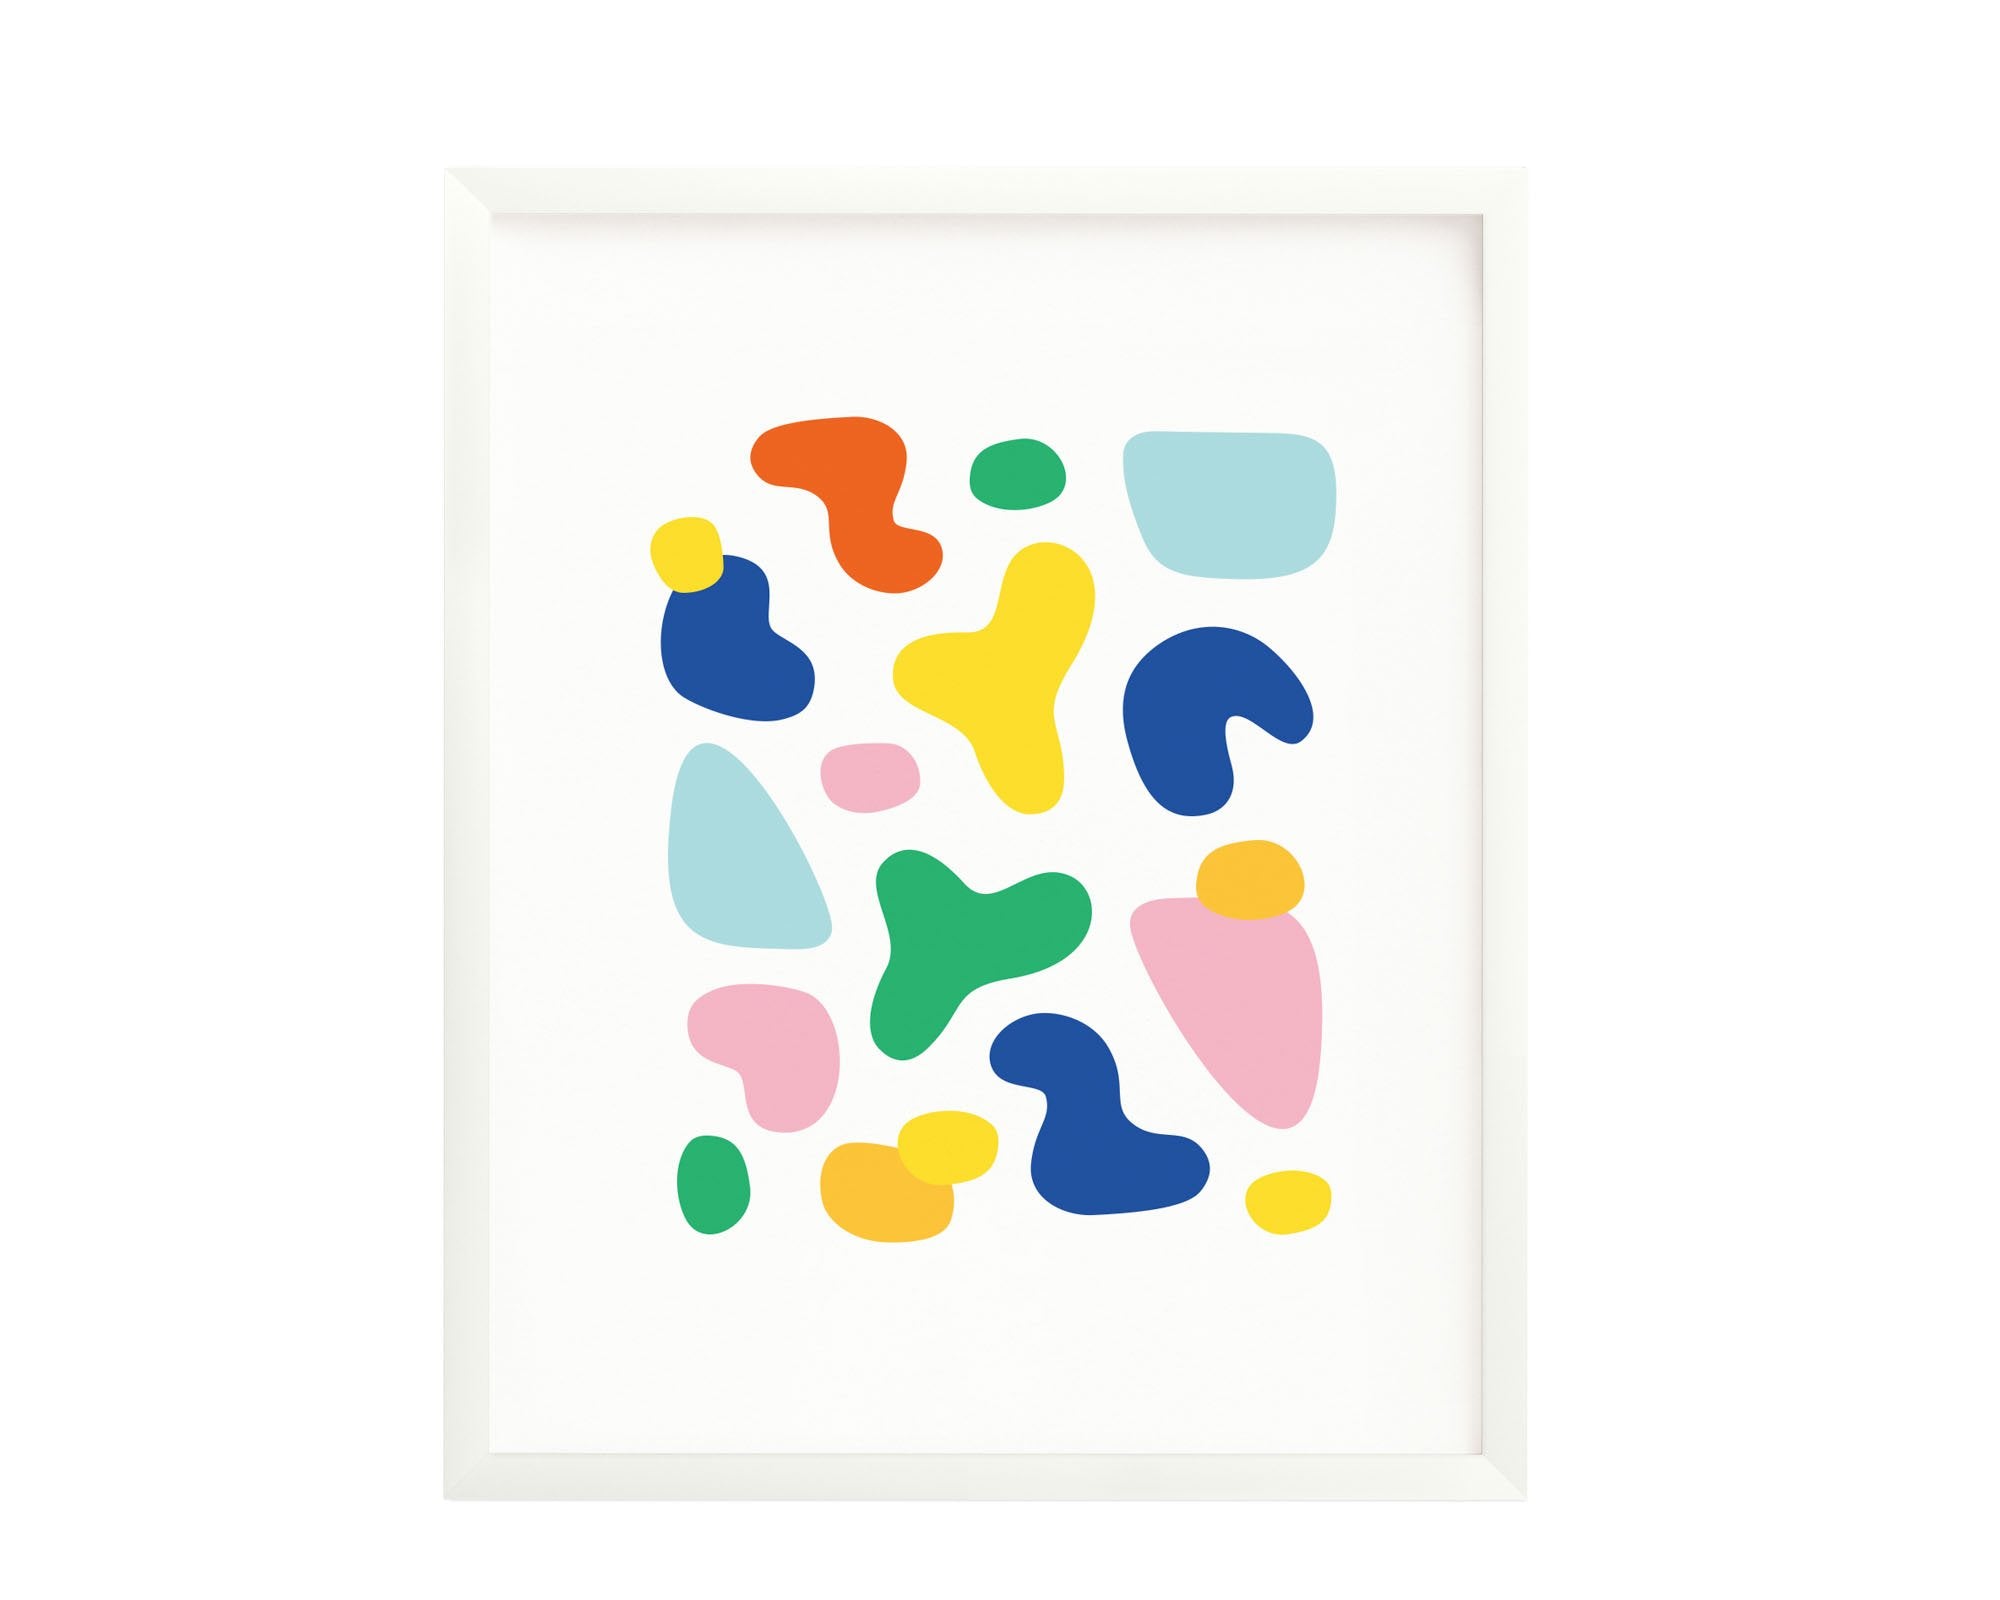 "Noki" abstract floating shapes archival giclée art print. Made in USA by My Darlin' @mydarlin_bk